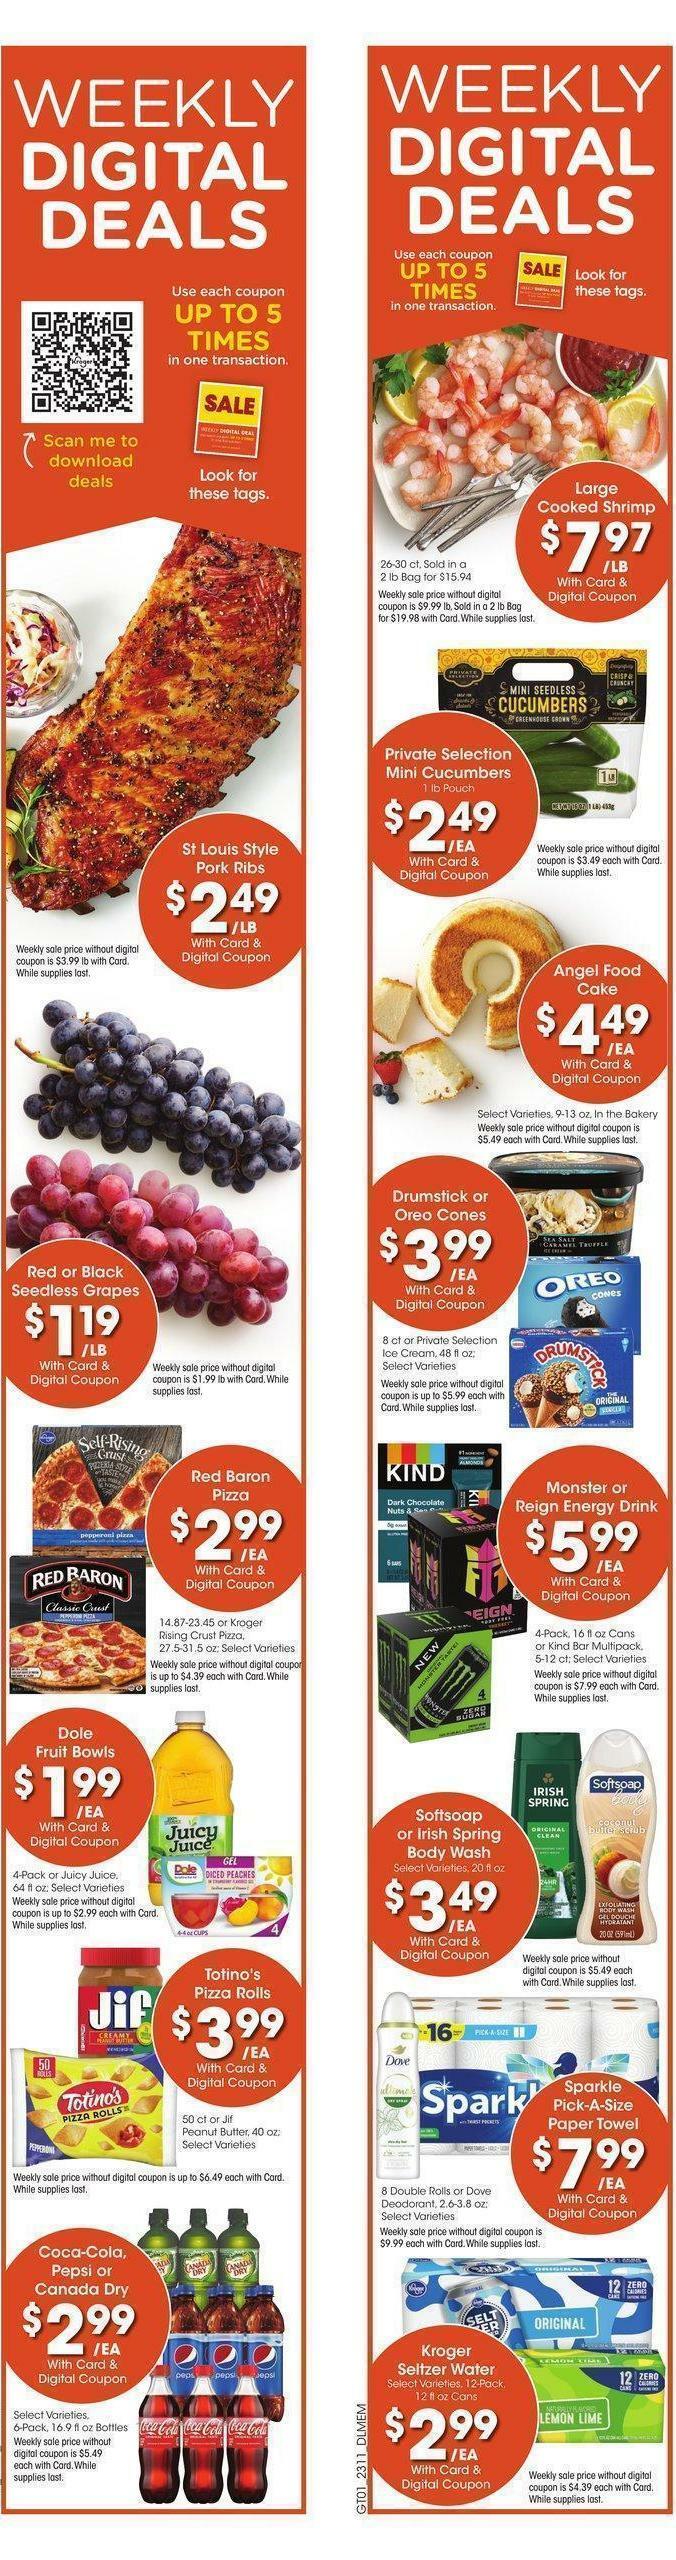 Kroger Weekly Ad from April 12